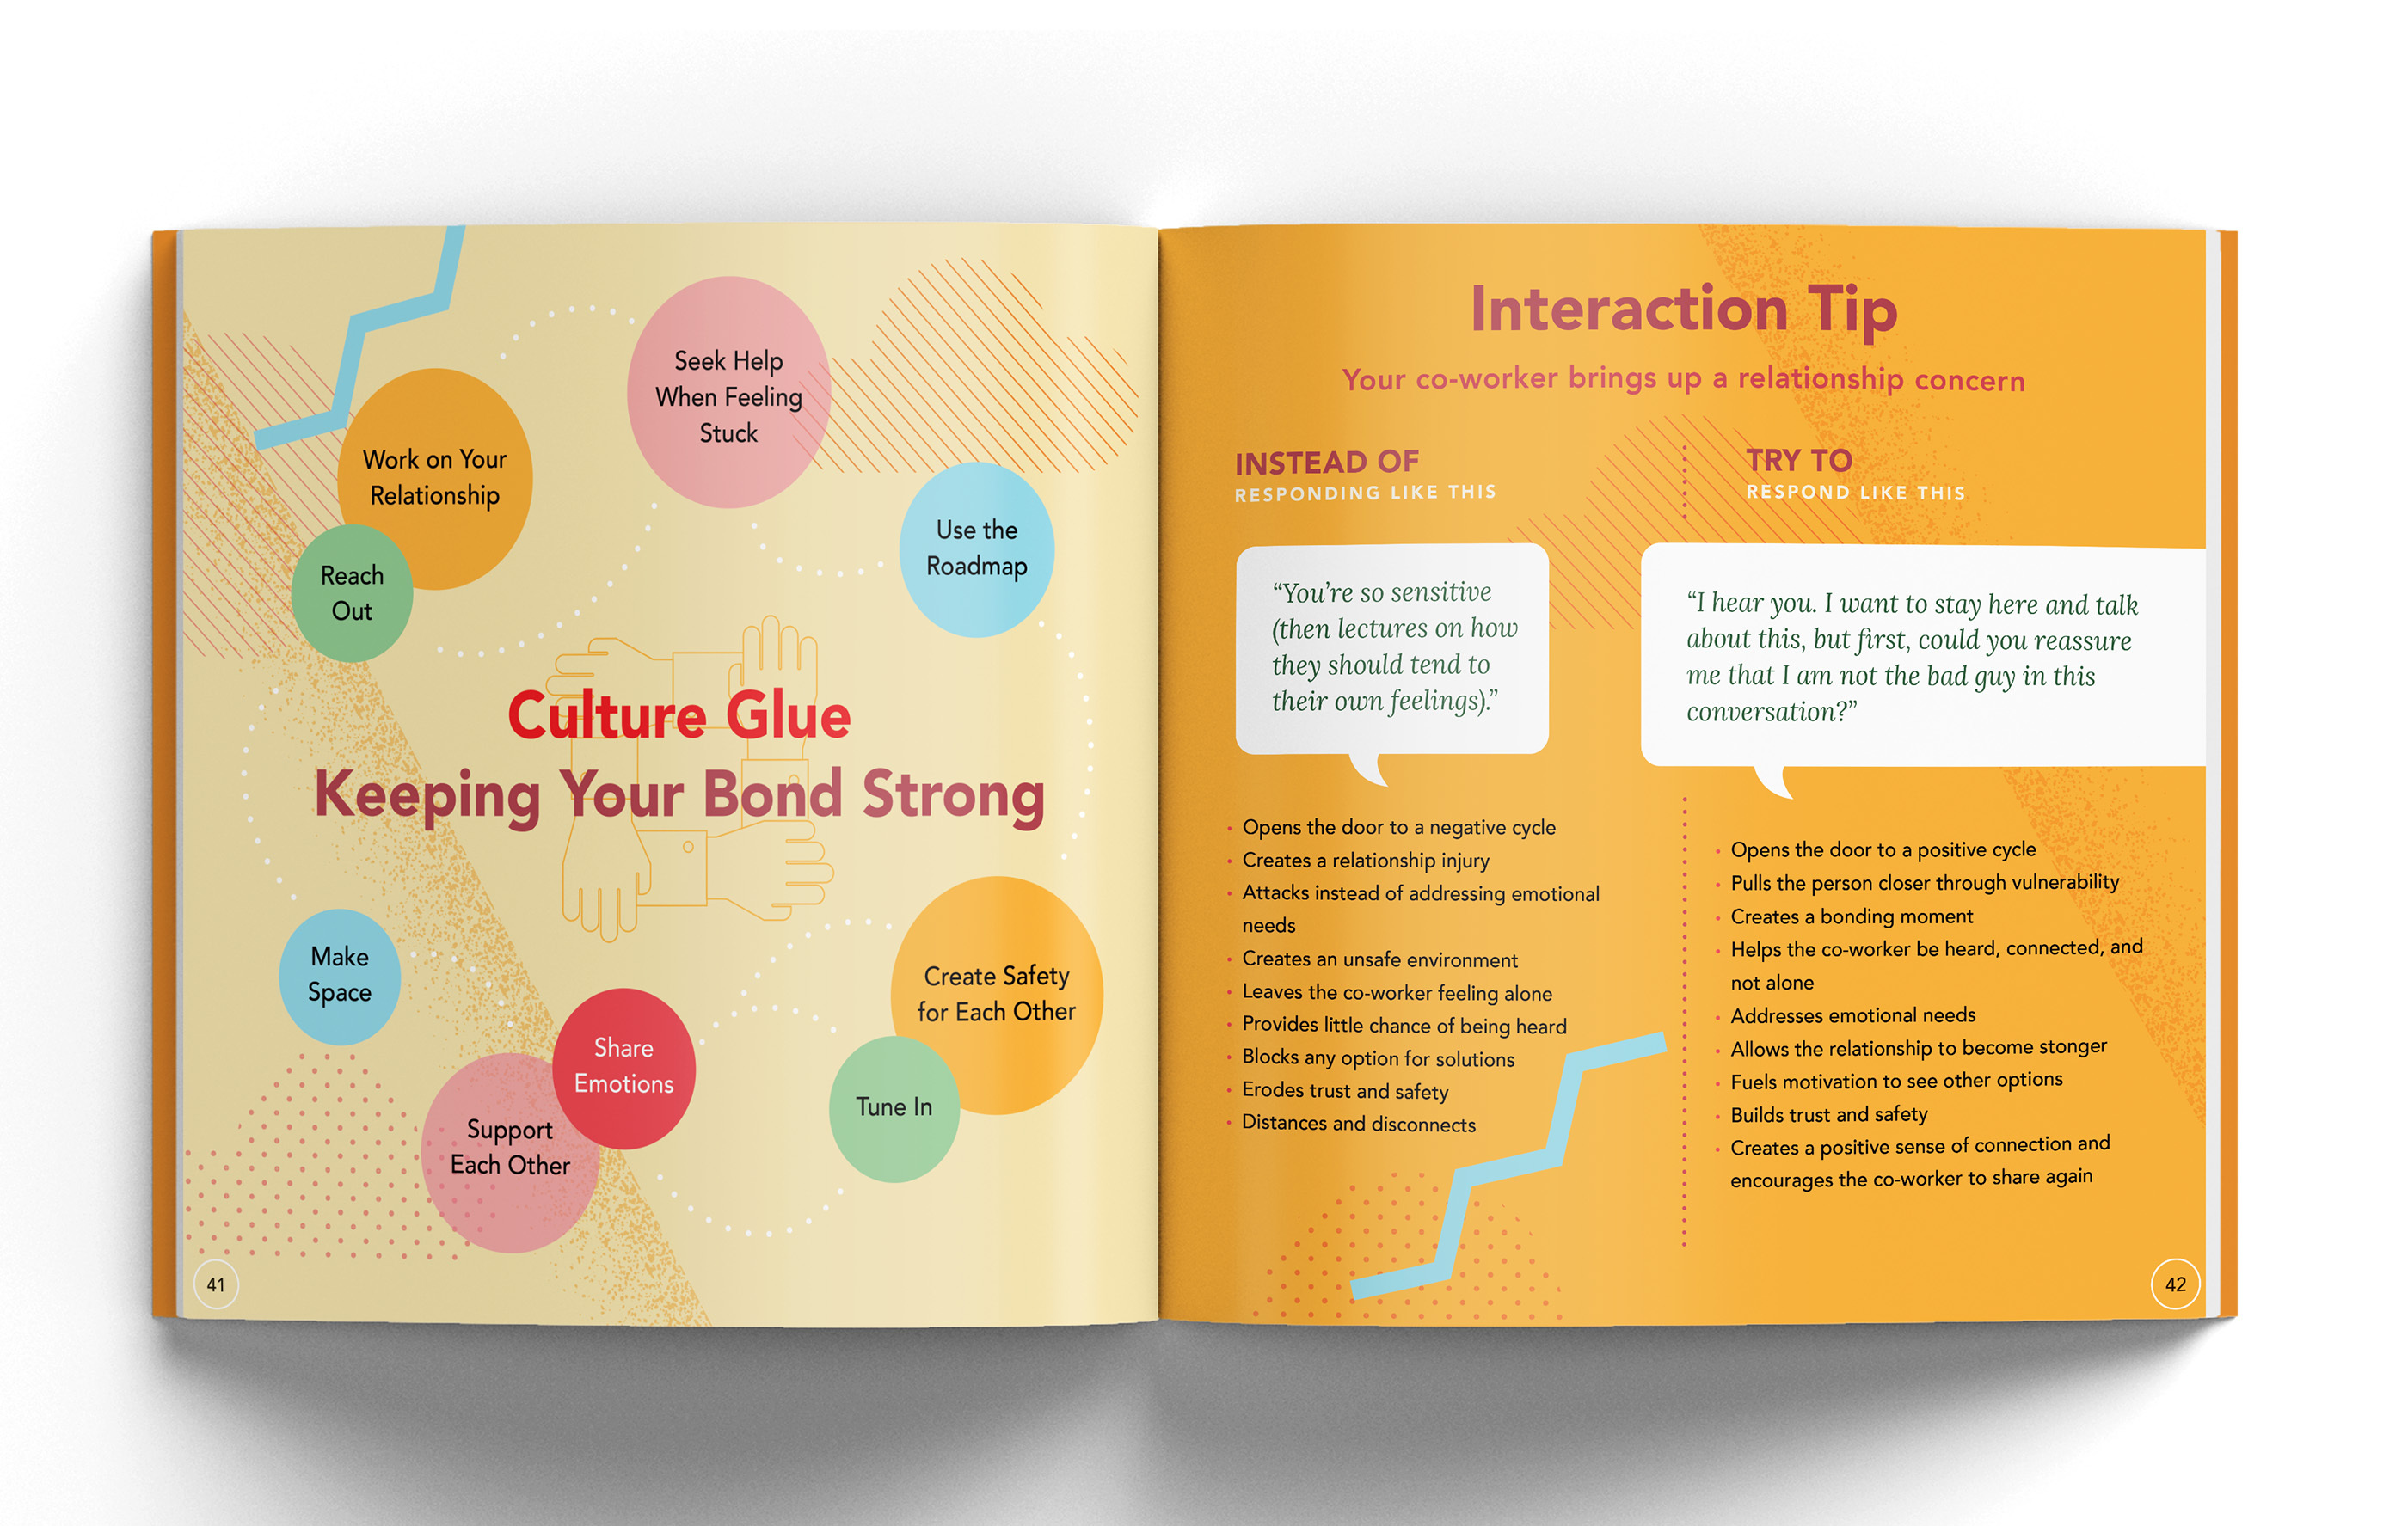 Pages 41 and 42 from The Connected Culture book